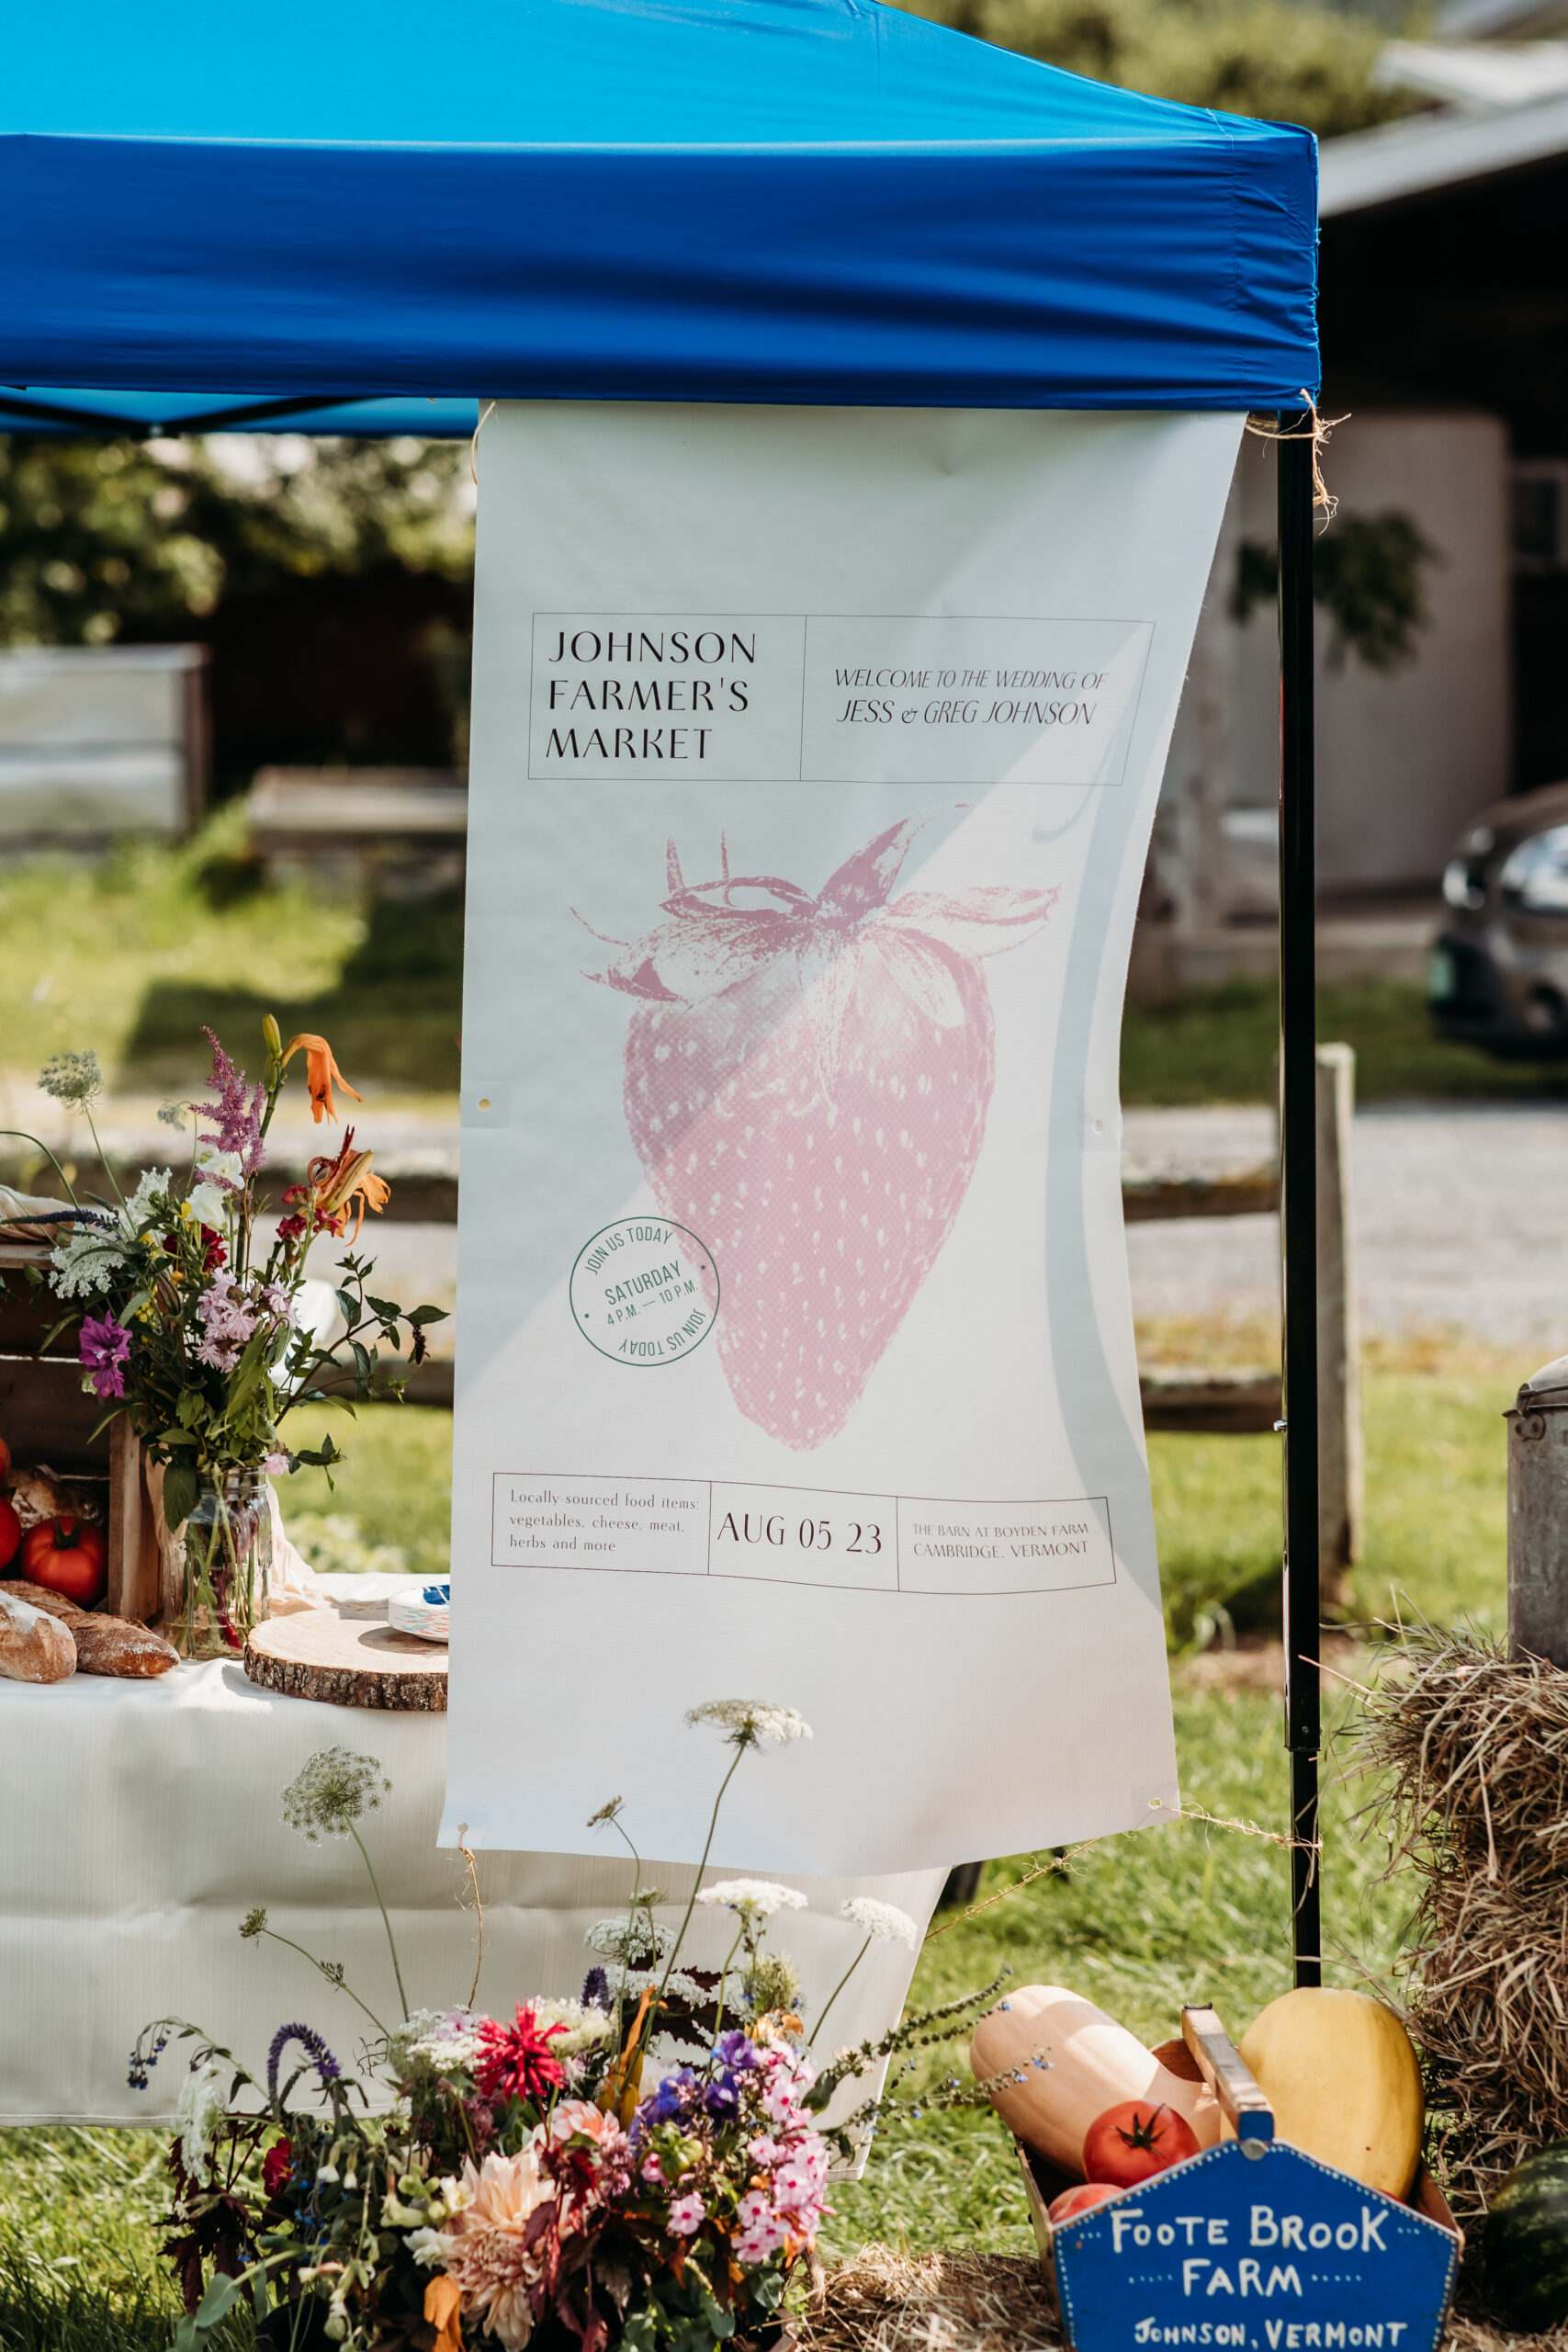 A banner and tent at a stall at Jess and Greg's farmers market themed wedding reception